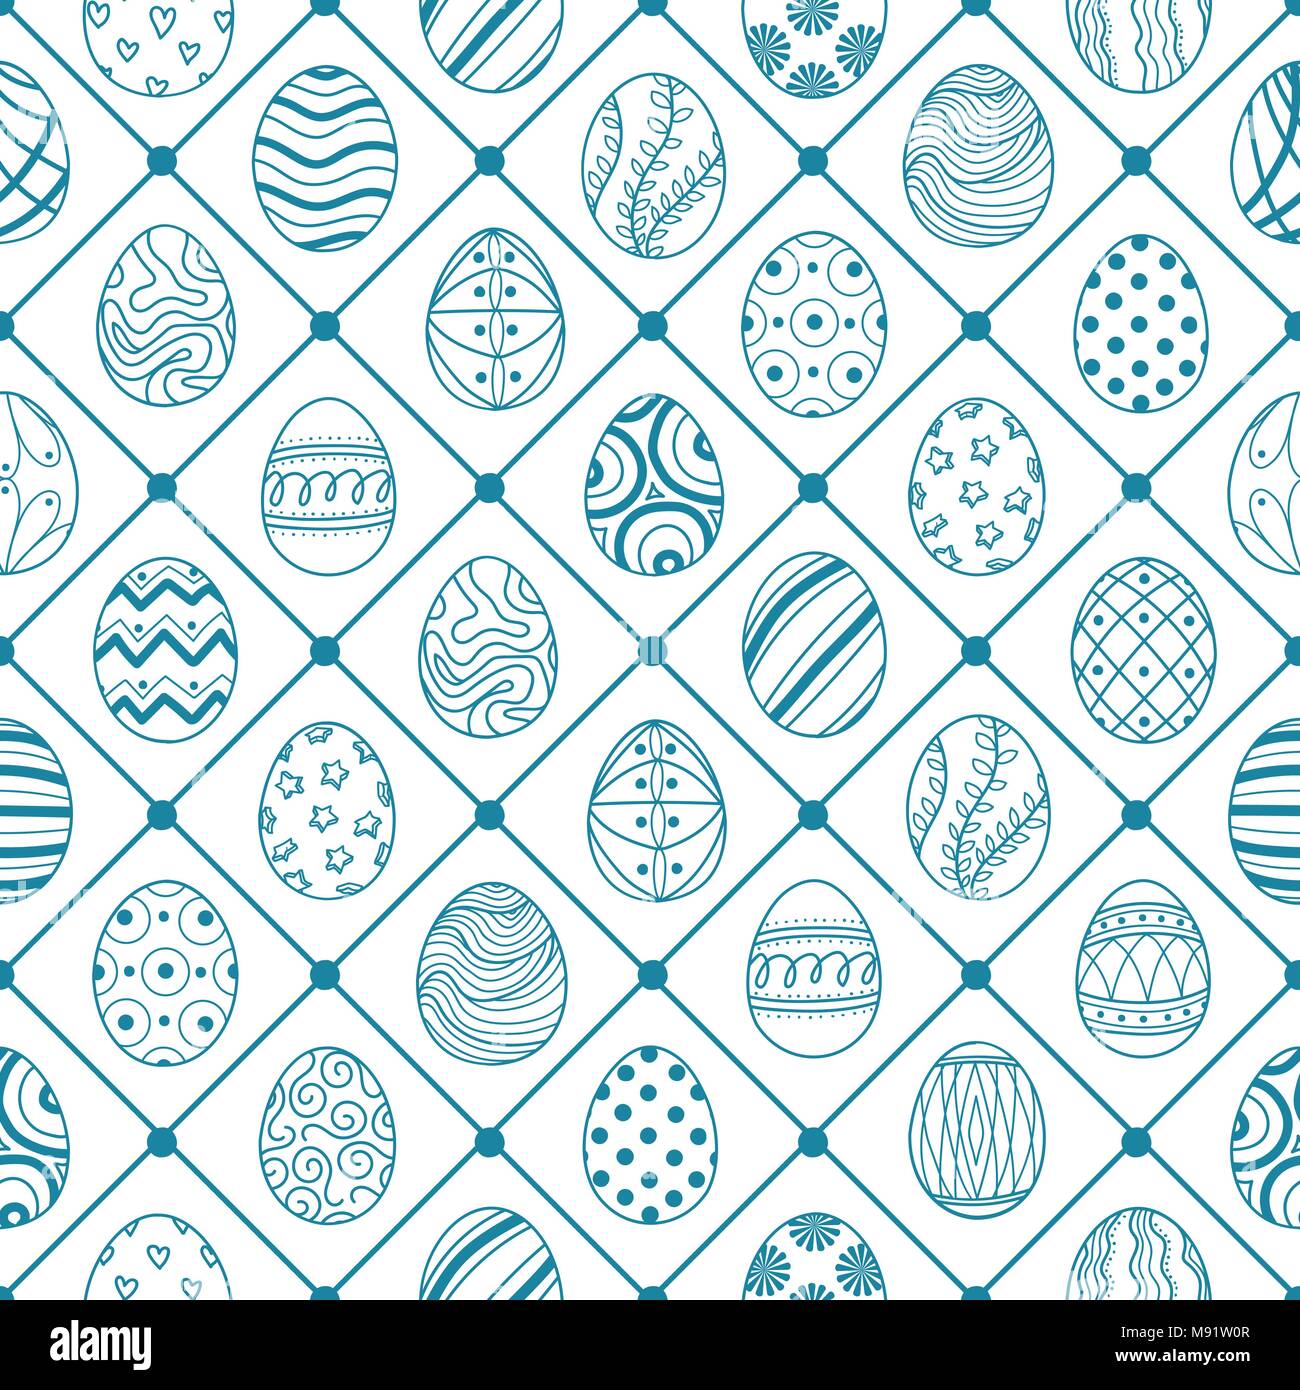 Cute Easter eggs in blue outline with blue square on white background. Cute hand drawn seamless pattern design for Easter festival in vector illustrat Stock Vector